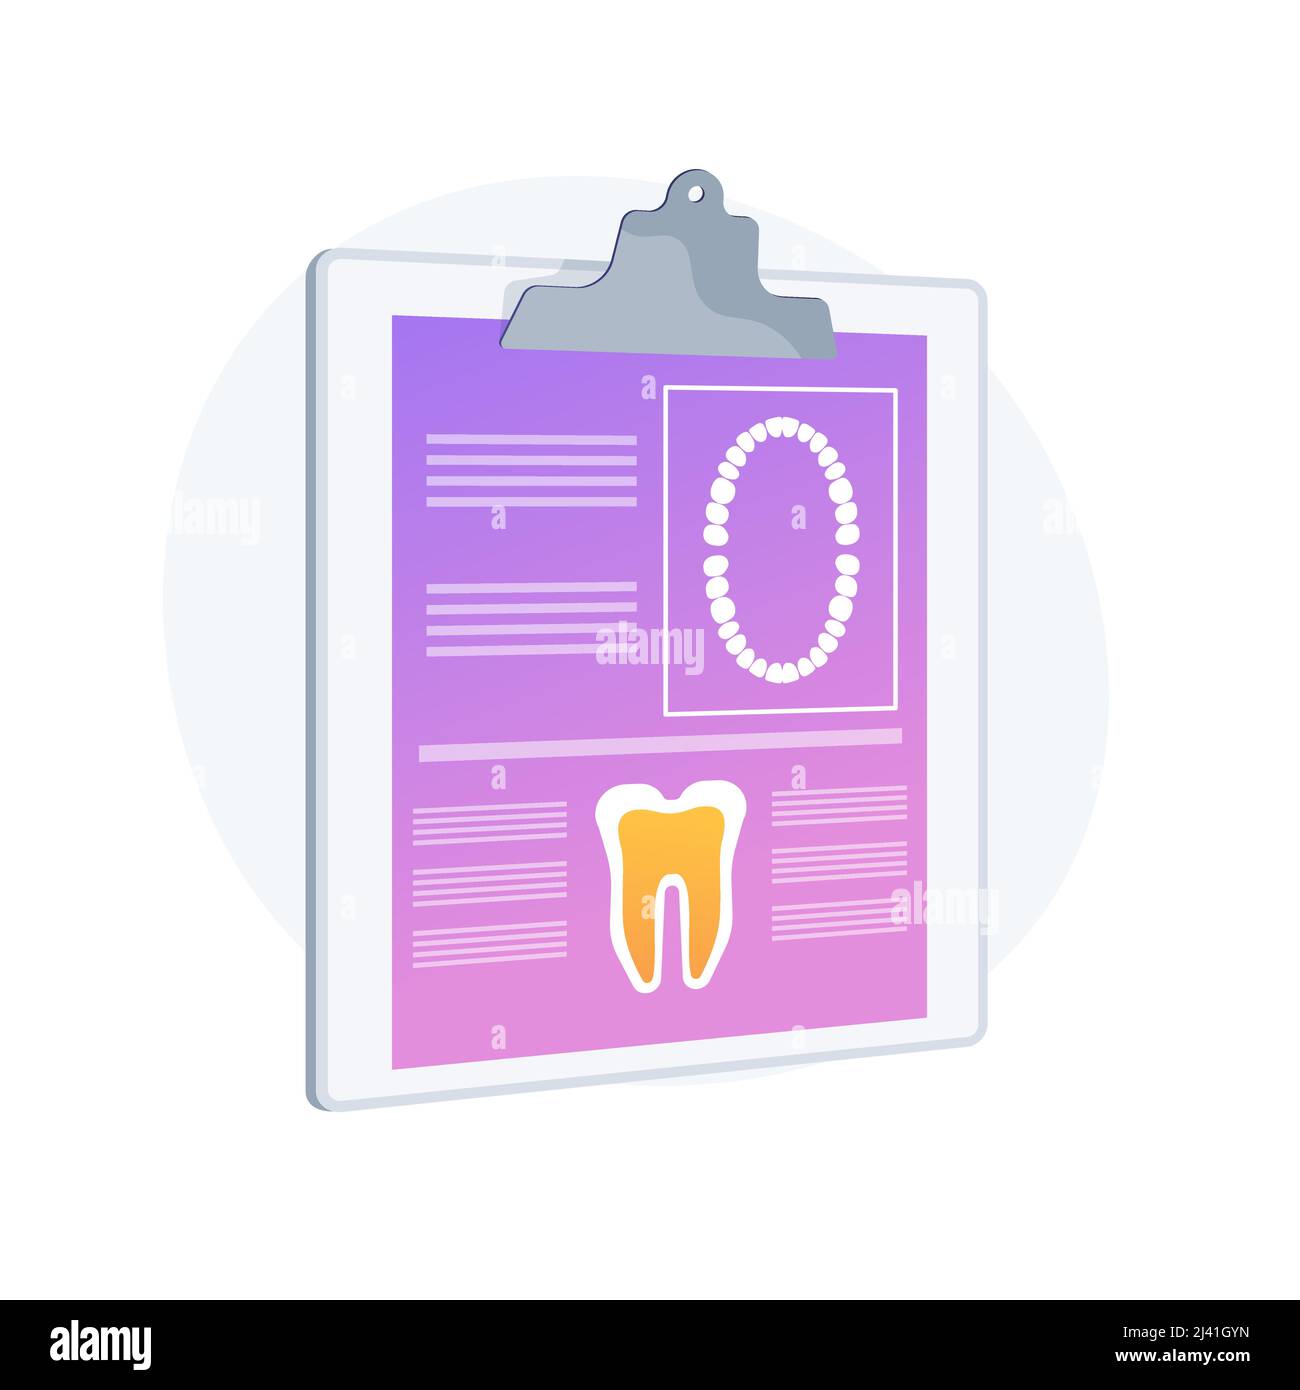 Dental patient card abstract concept vector illustration. Referral card holder, dental office loyalty program, electronic medical record, patient data Stock Vector